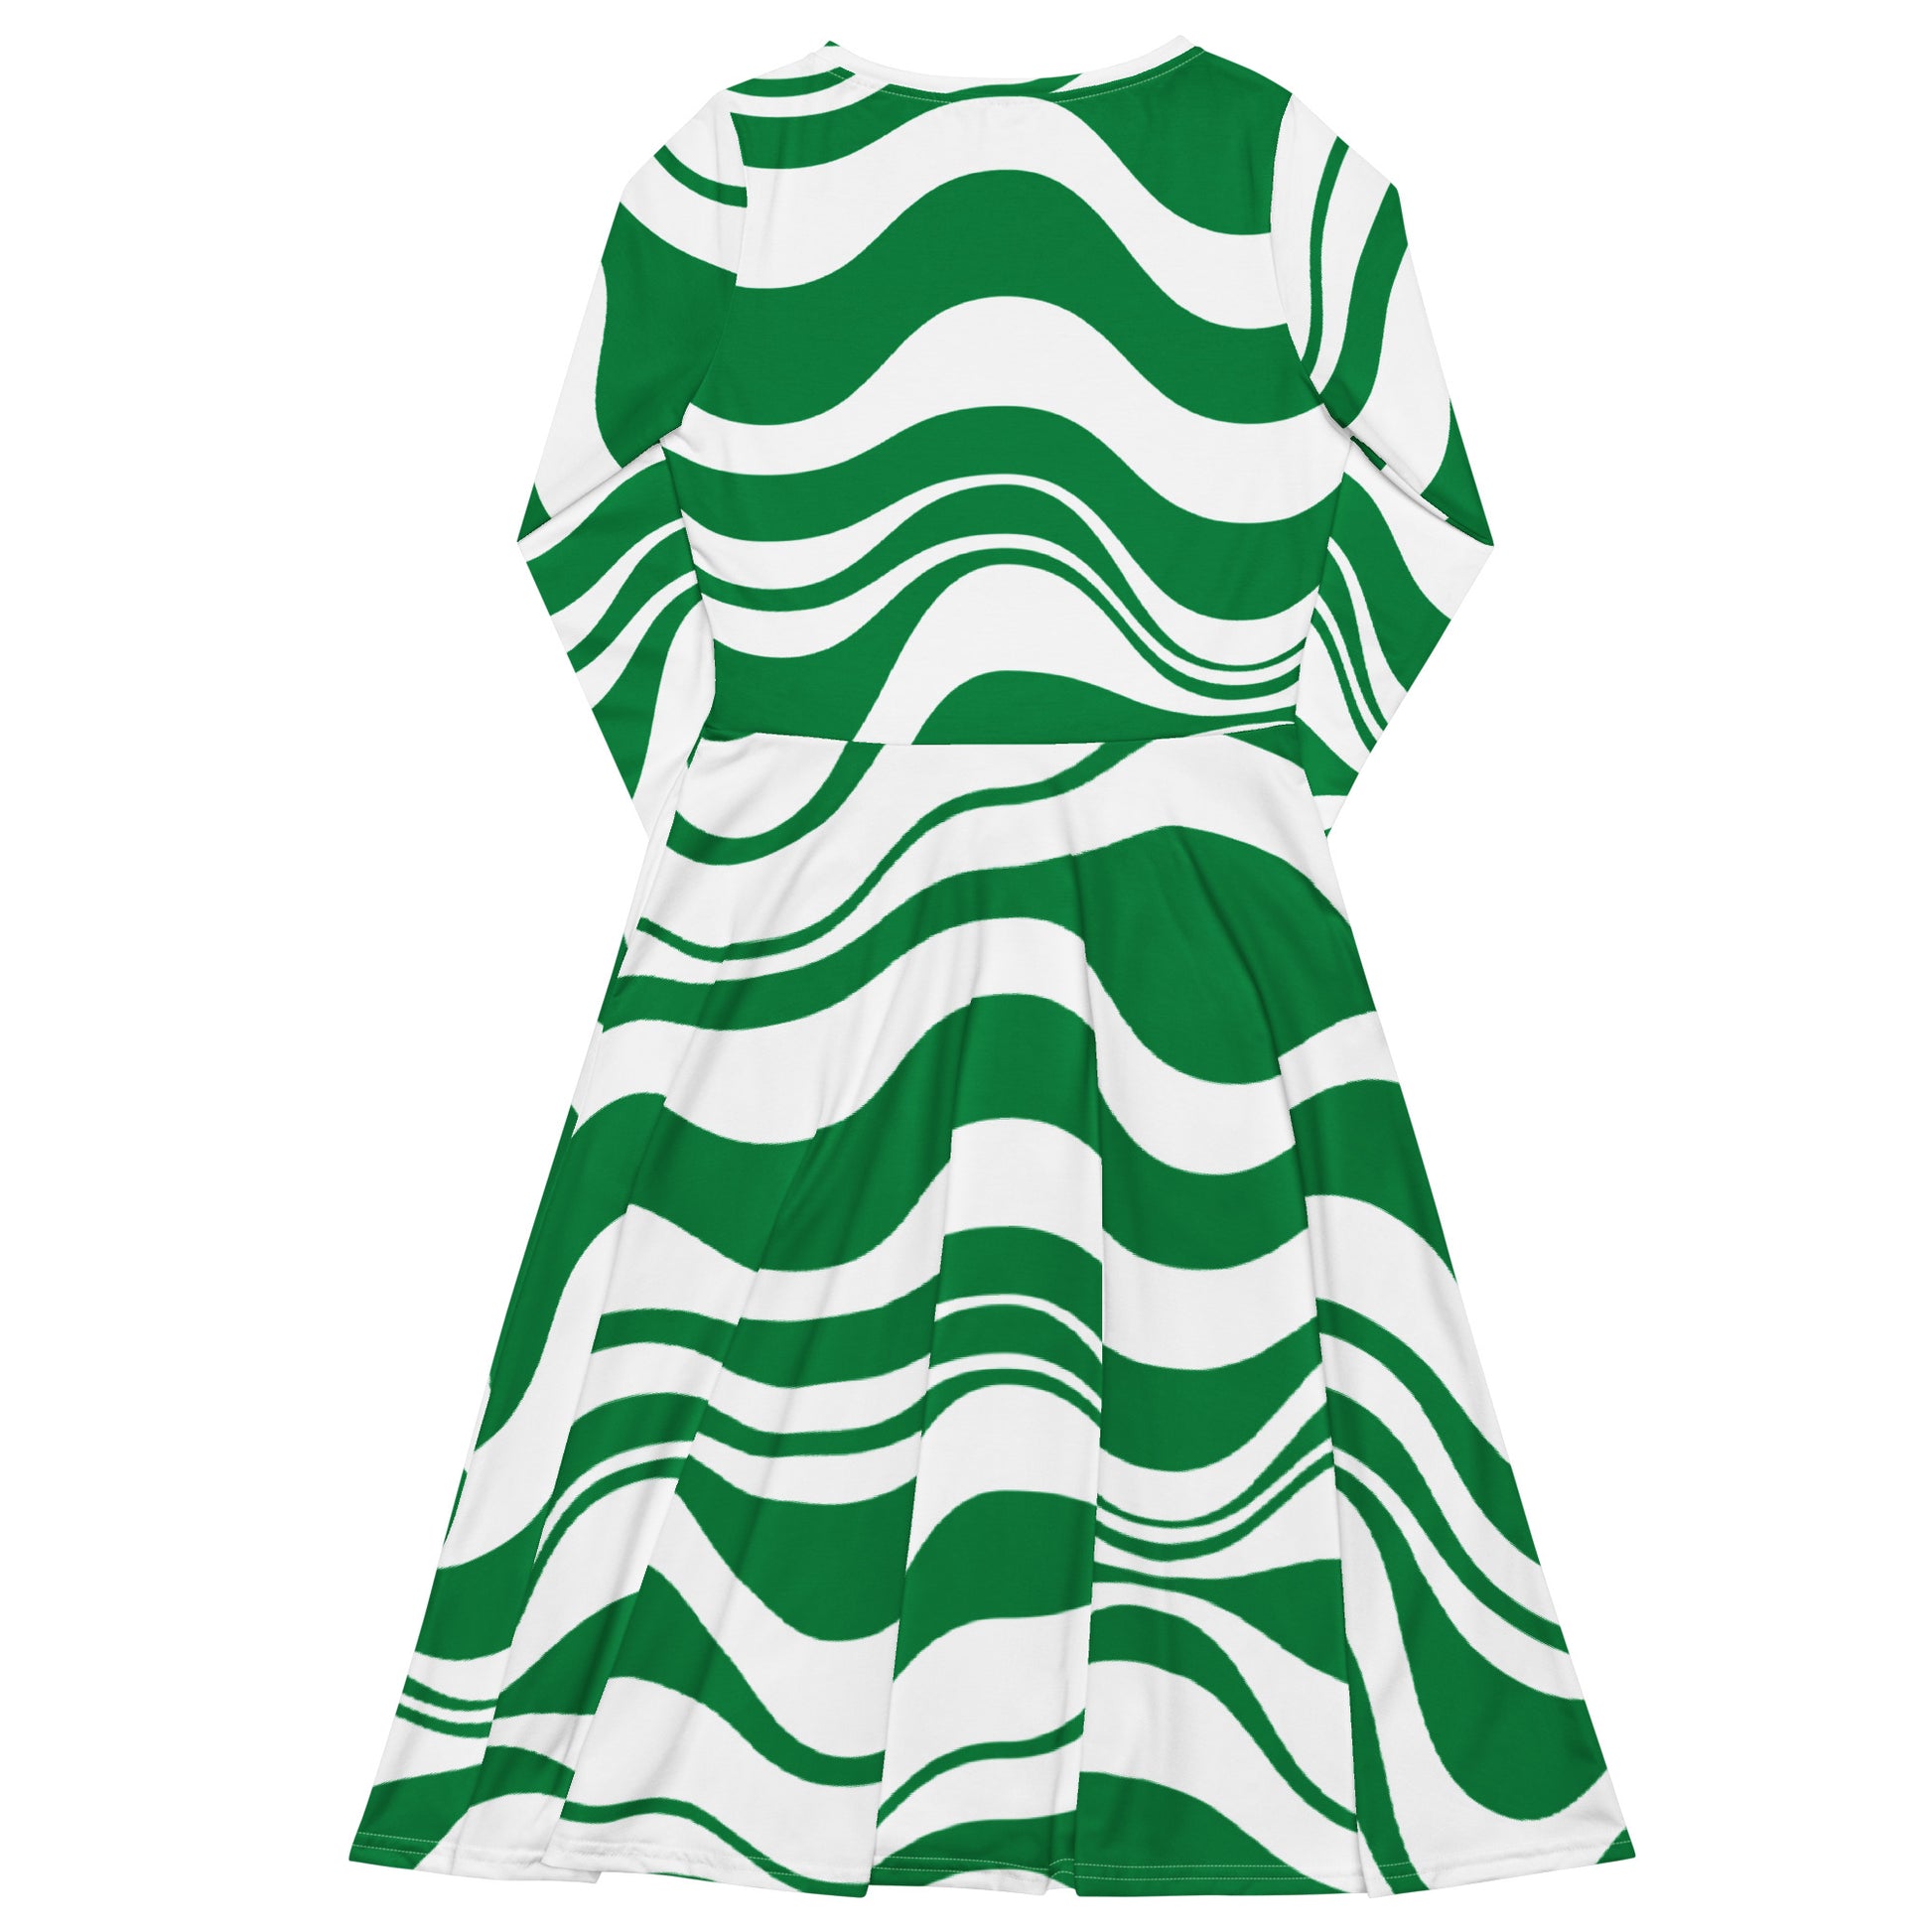 ENERGY WAVES green - Midi dress with long sleeves and handy pockets